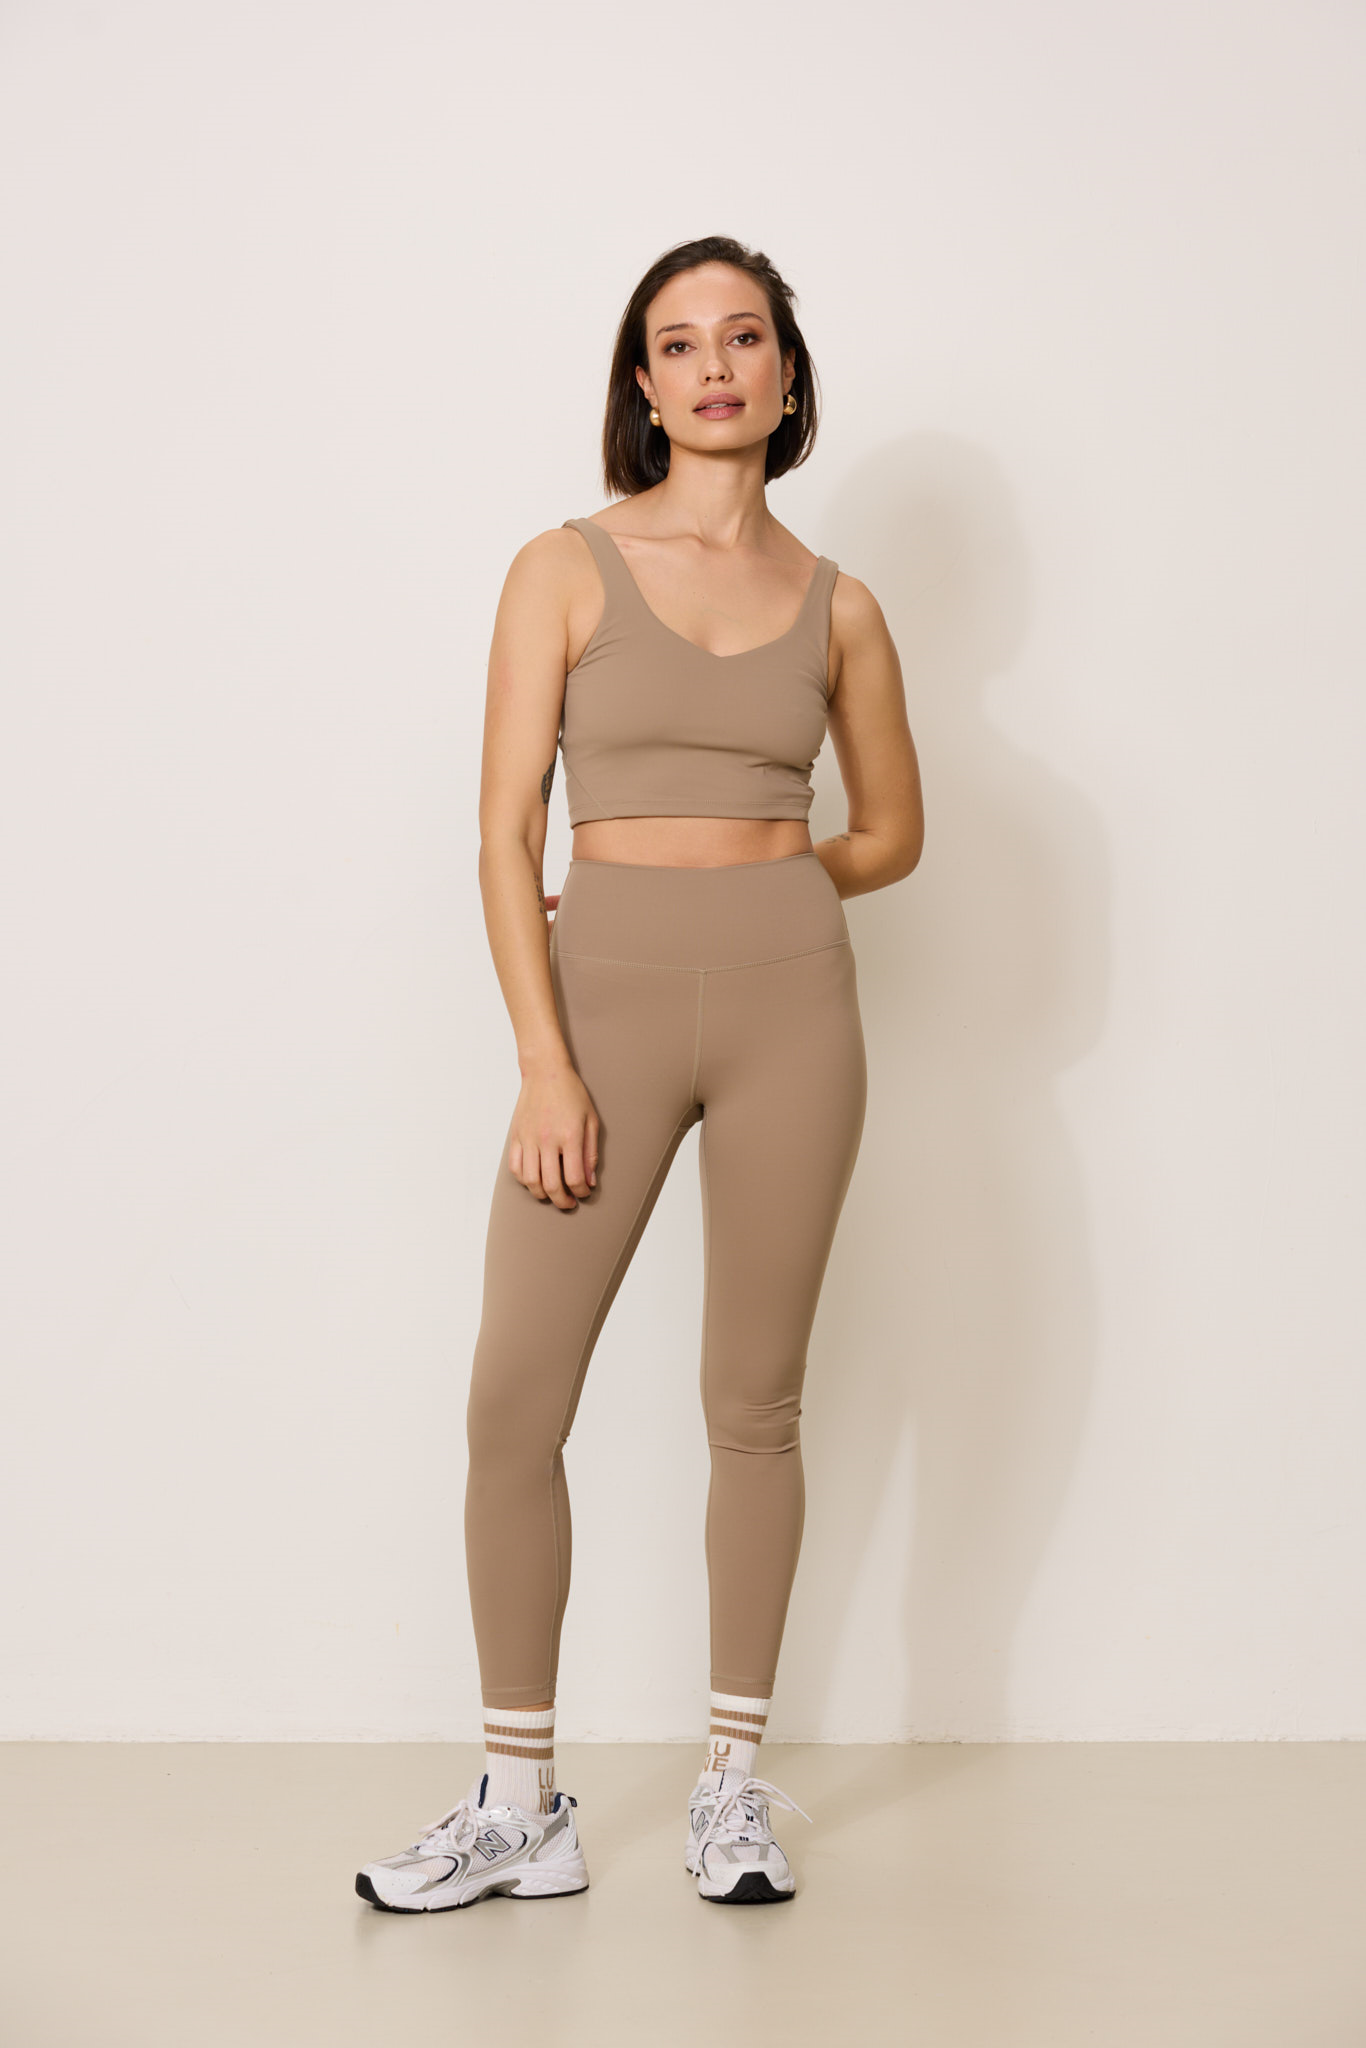 NEW activewear! Sculpting, supportive, AND comfortable. LANDYN10